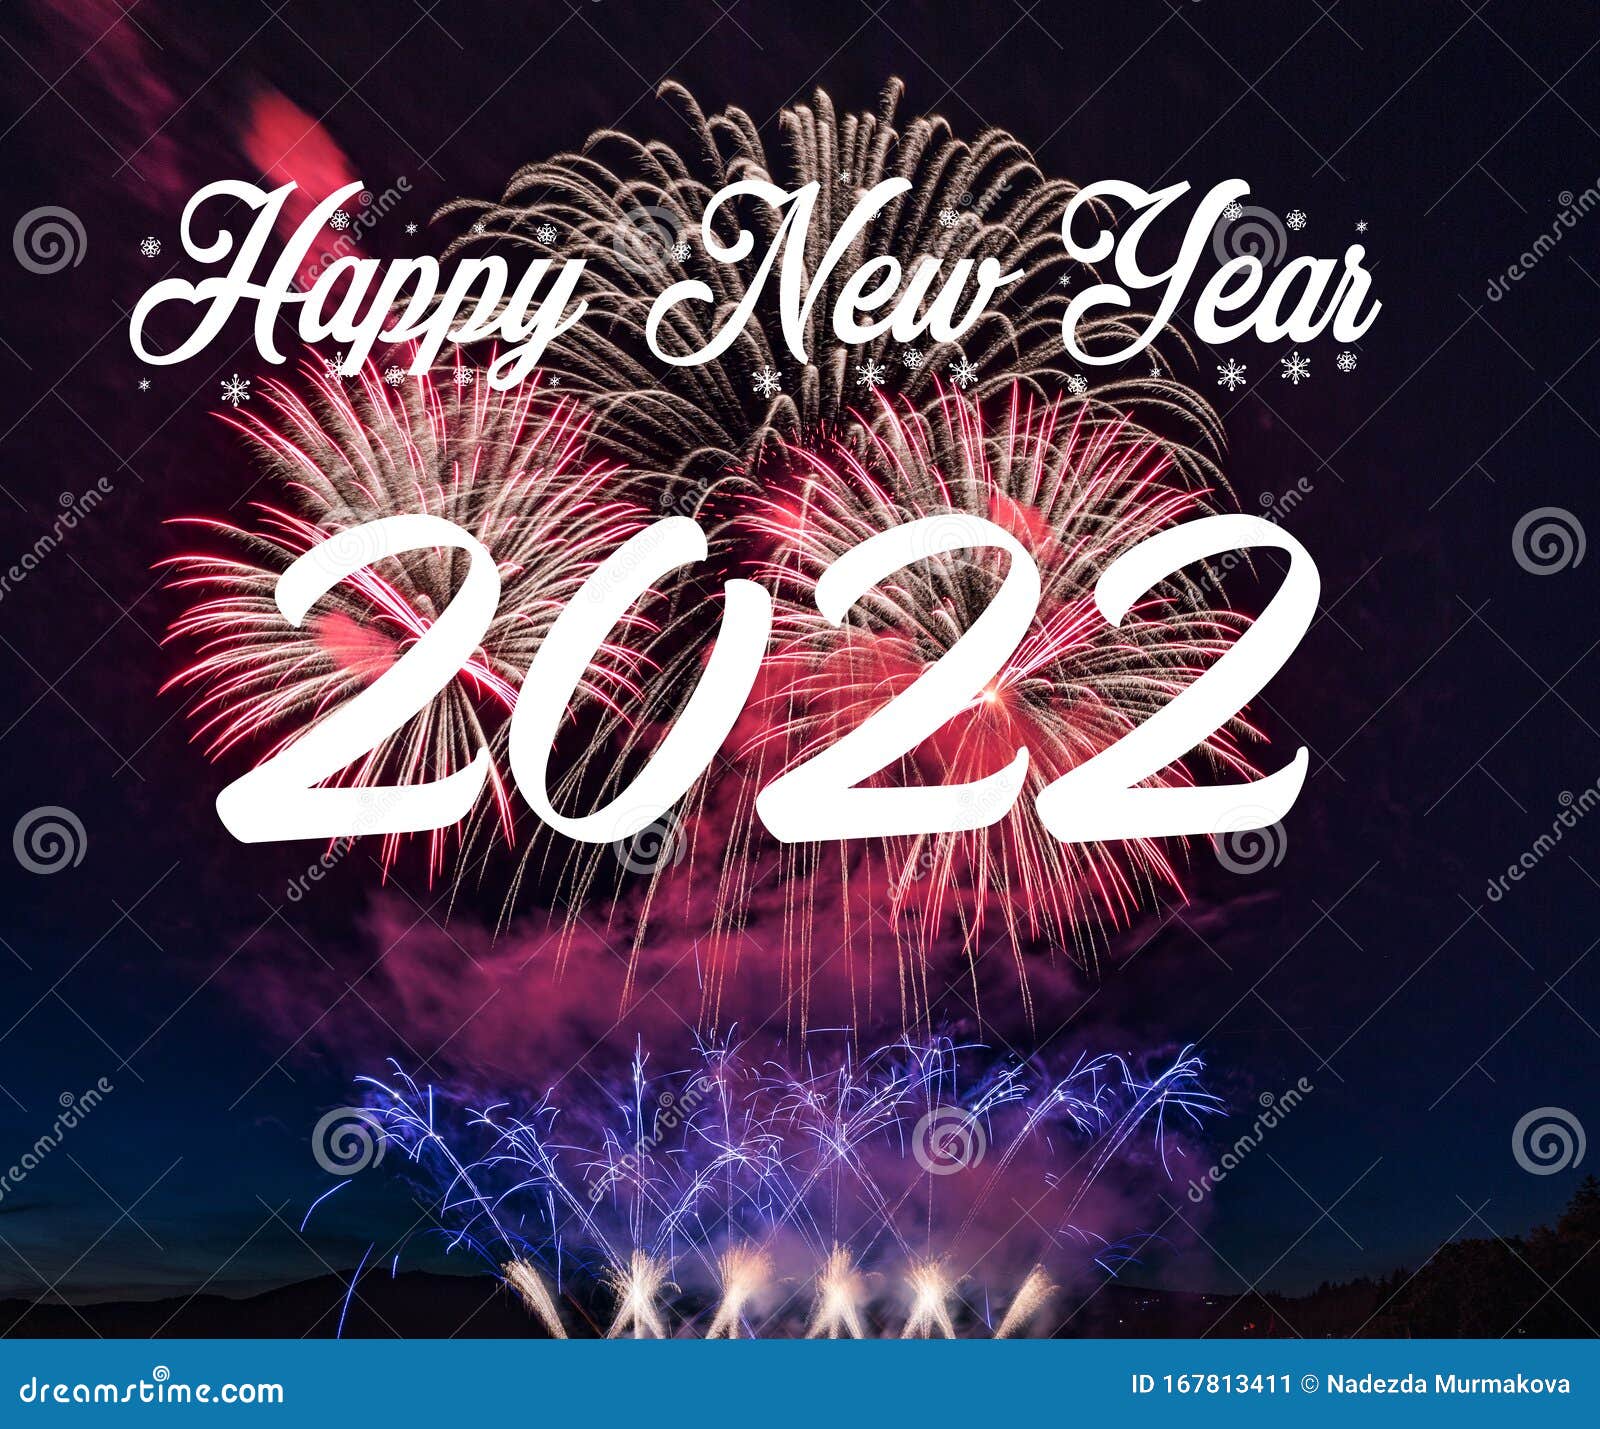 Happy New Year 2022  With Fireworks Background Stock Image  